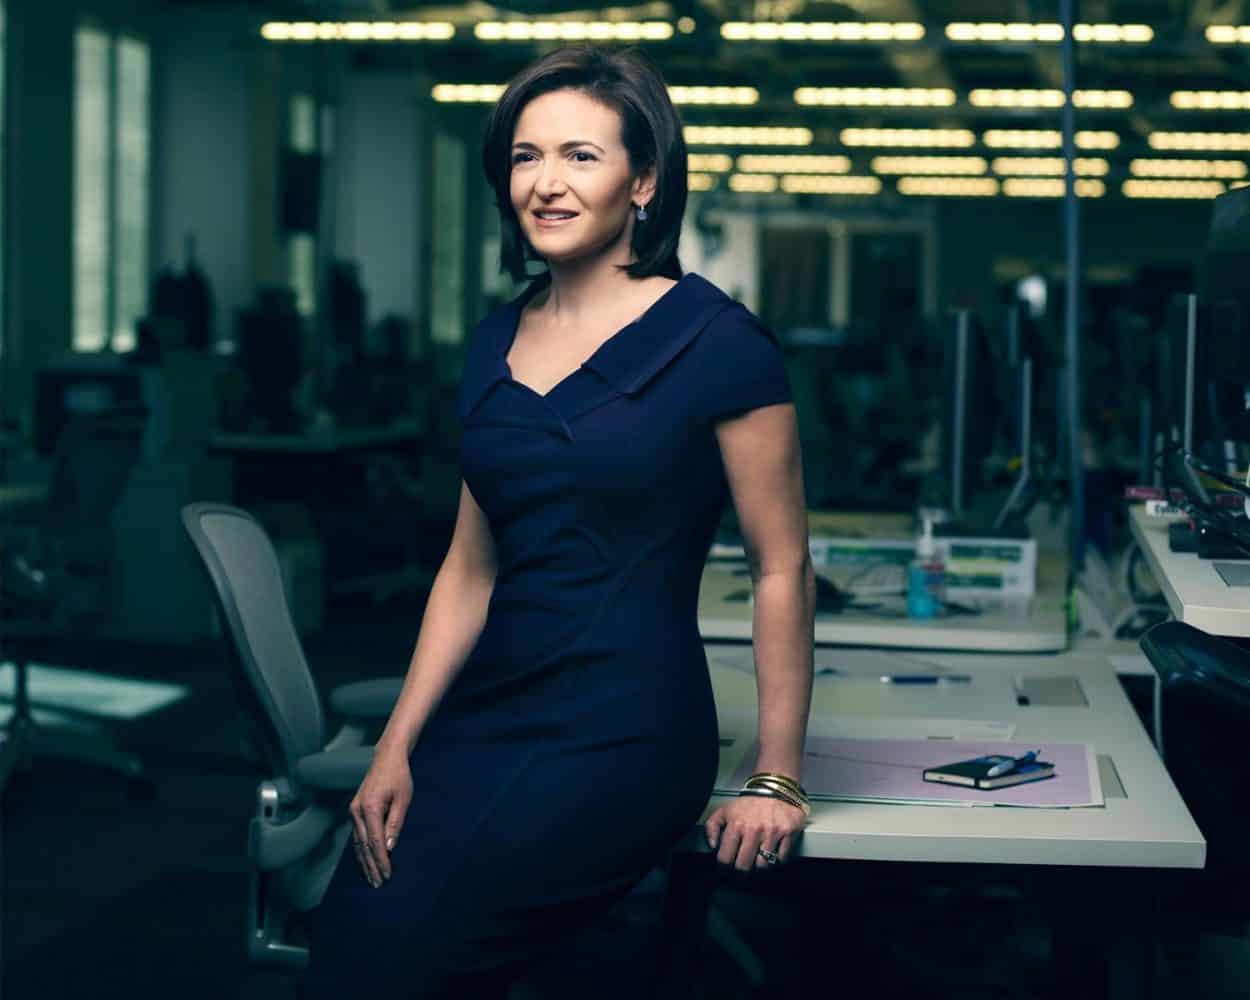 Best Advice From The World’s Most Successful Women In Business (Including Sheryl Sandberg of Facebook)